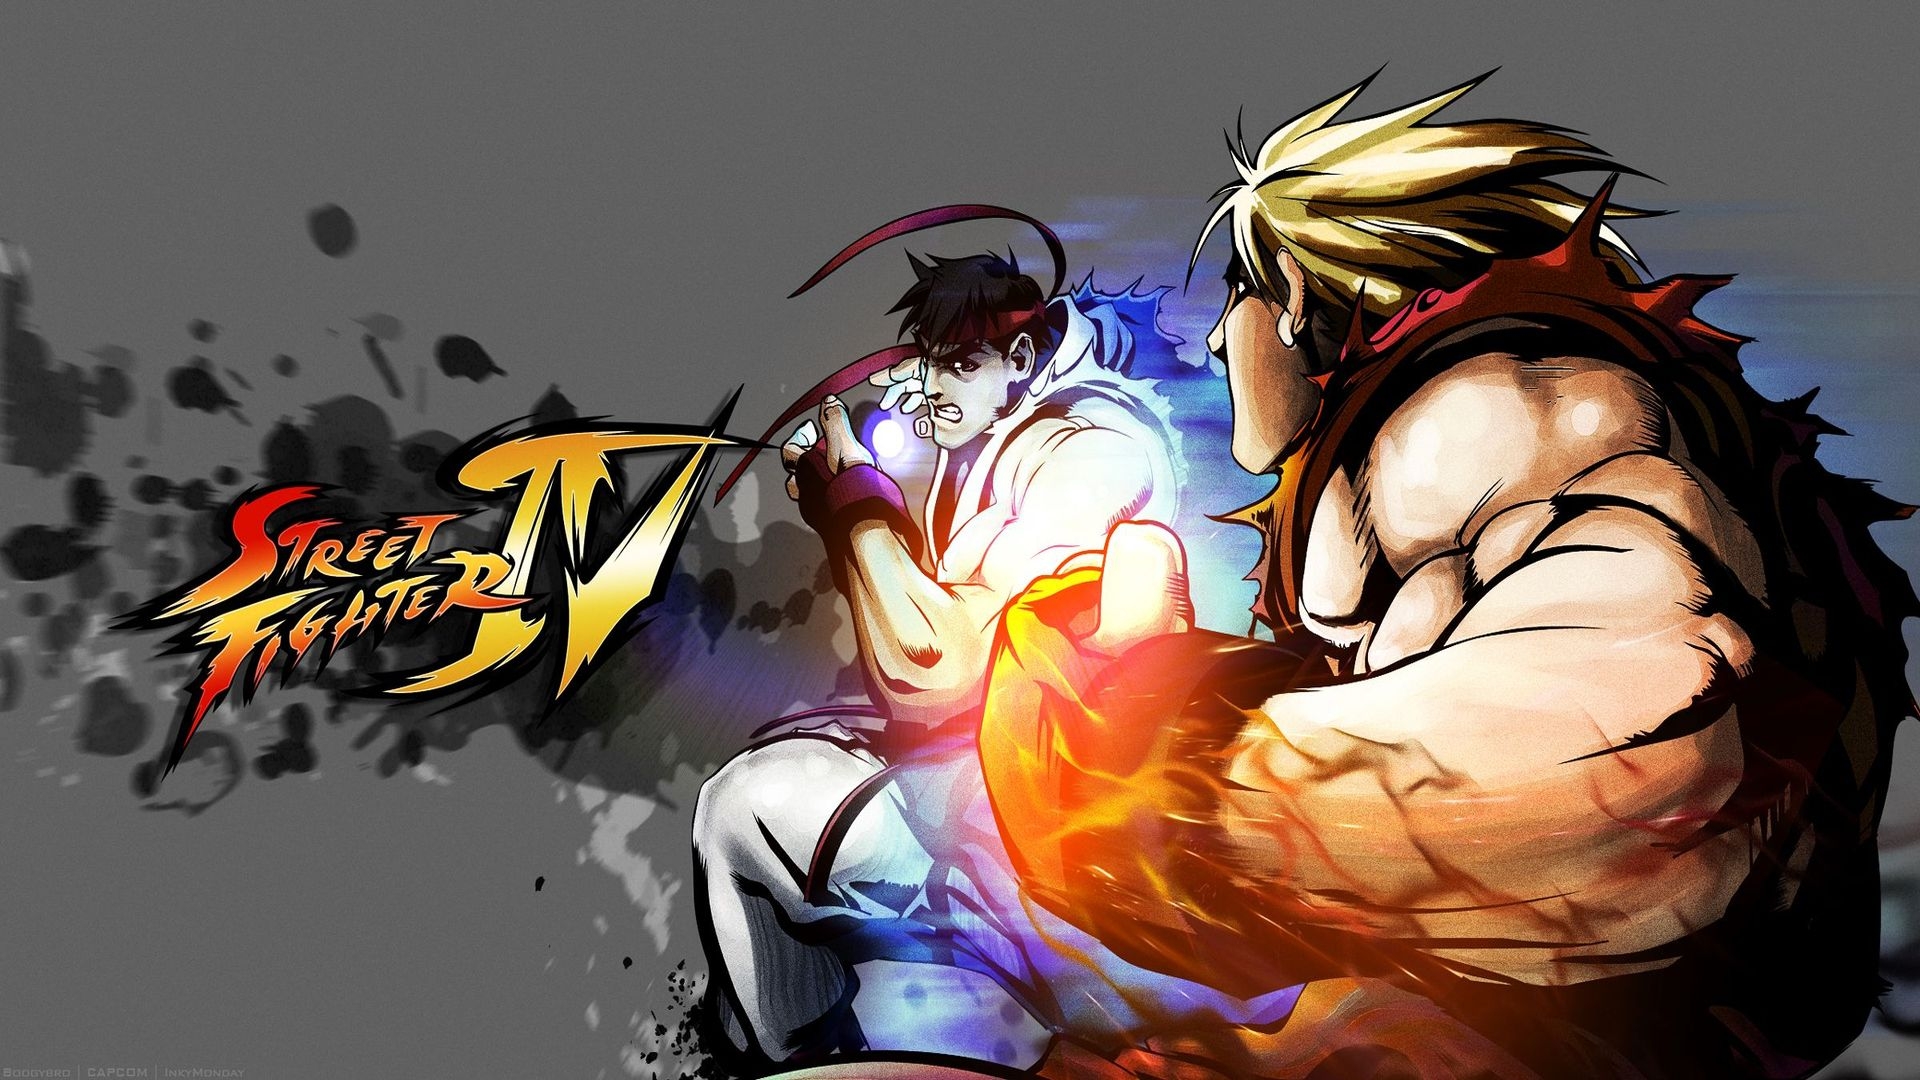 Street Fighter IV Game Wallpapers HD Wallpapers